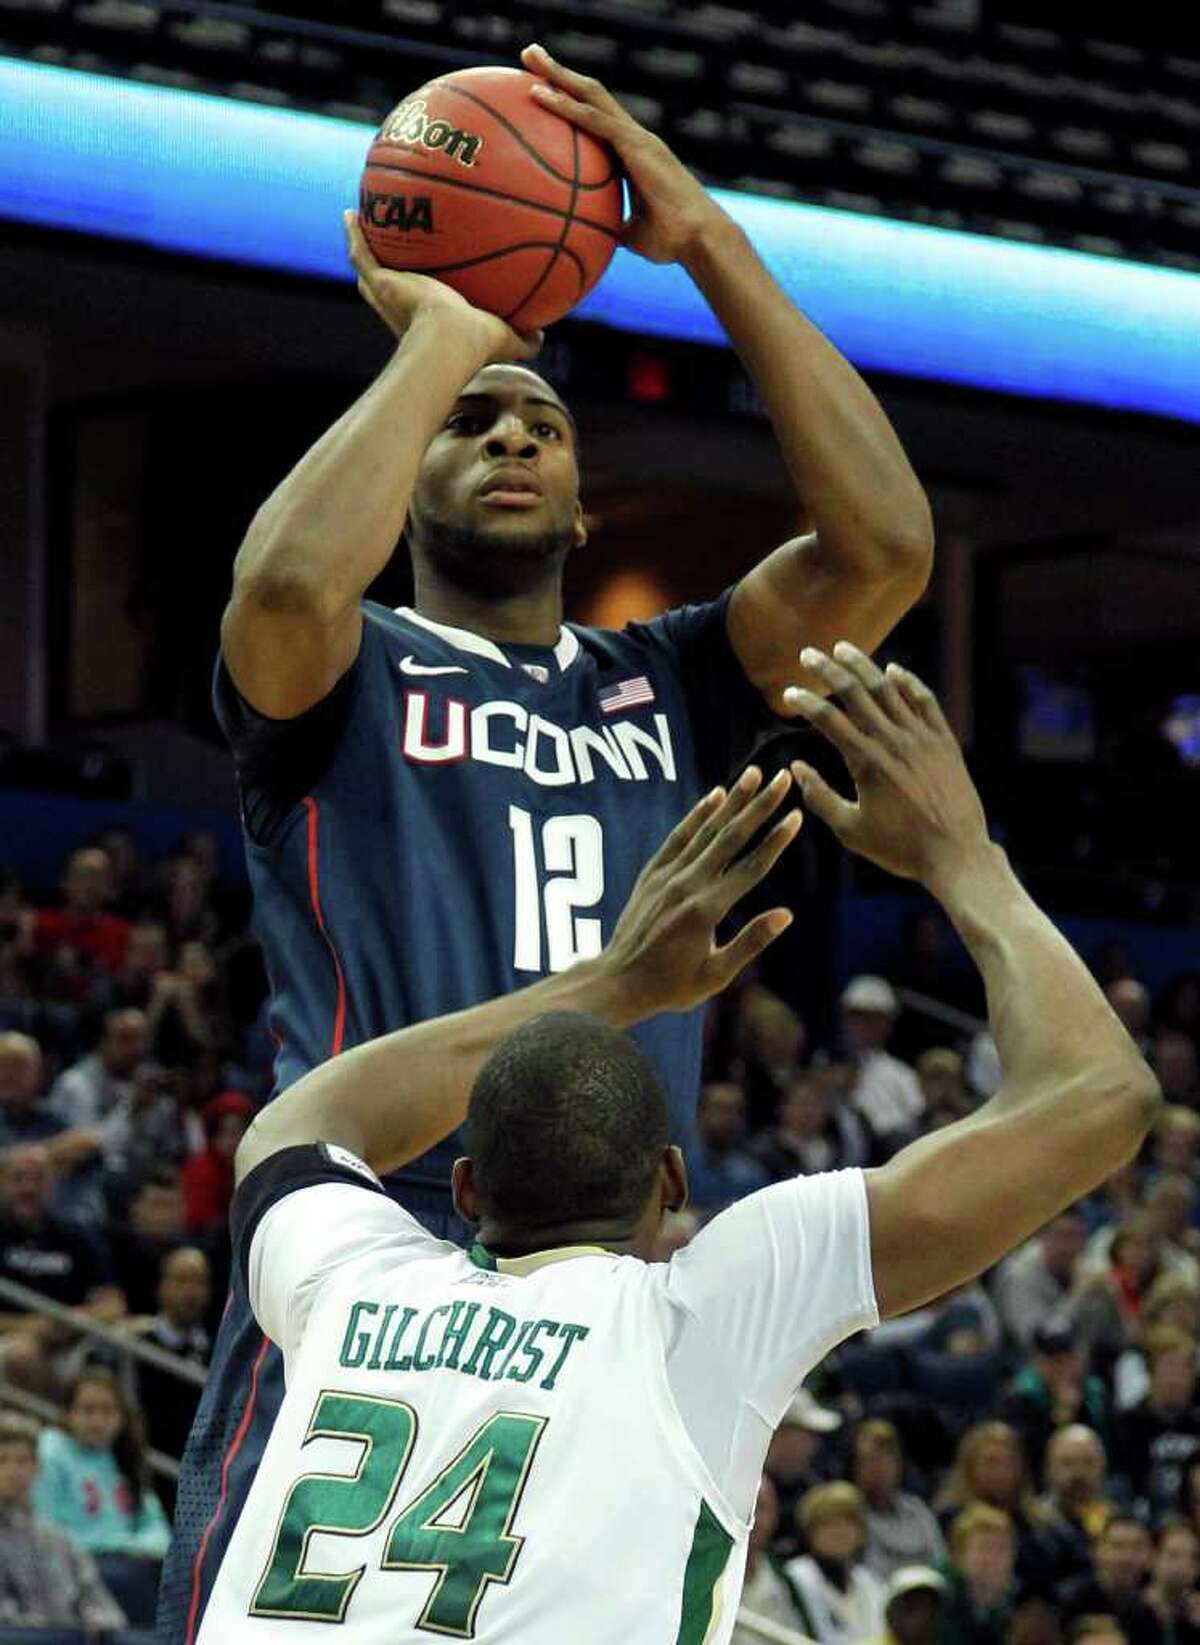 Connecticut center Andre Drummond (12) shoots over South Florida forward Augustus Gilchrist (24) during the first half of an NCAA college basketball game Wednesday Dec. 28, 2011, in Tampa, Fla. (AP Photo/Chris O'Meara)